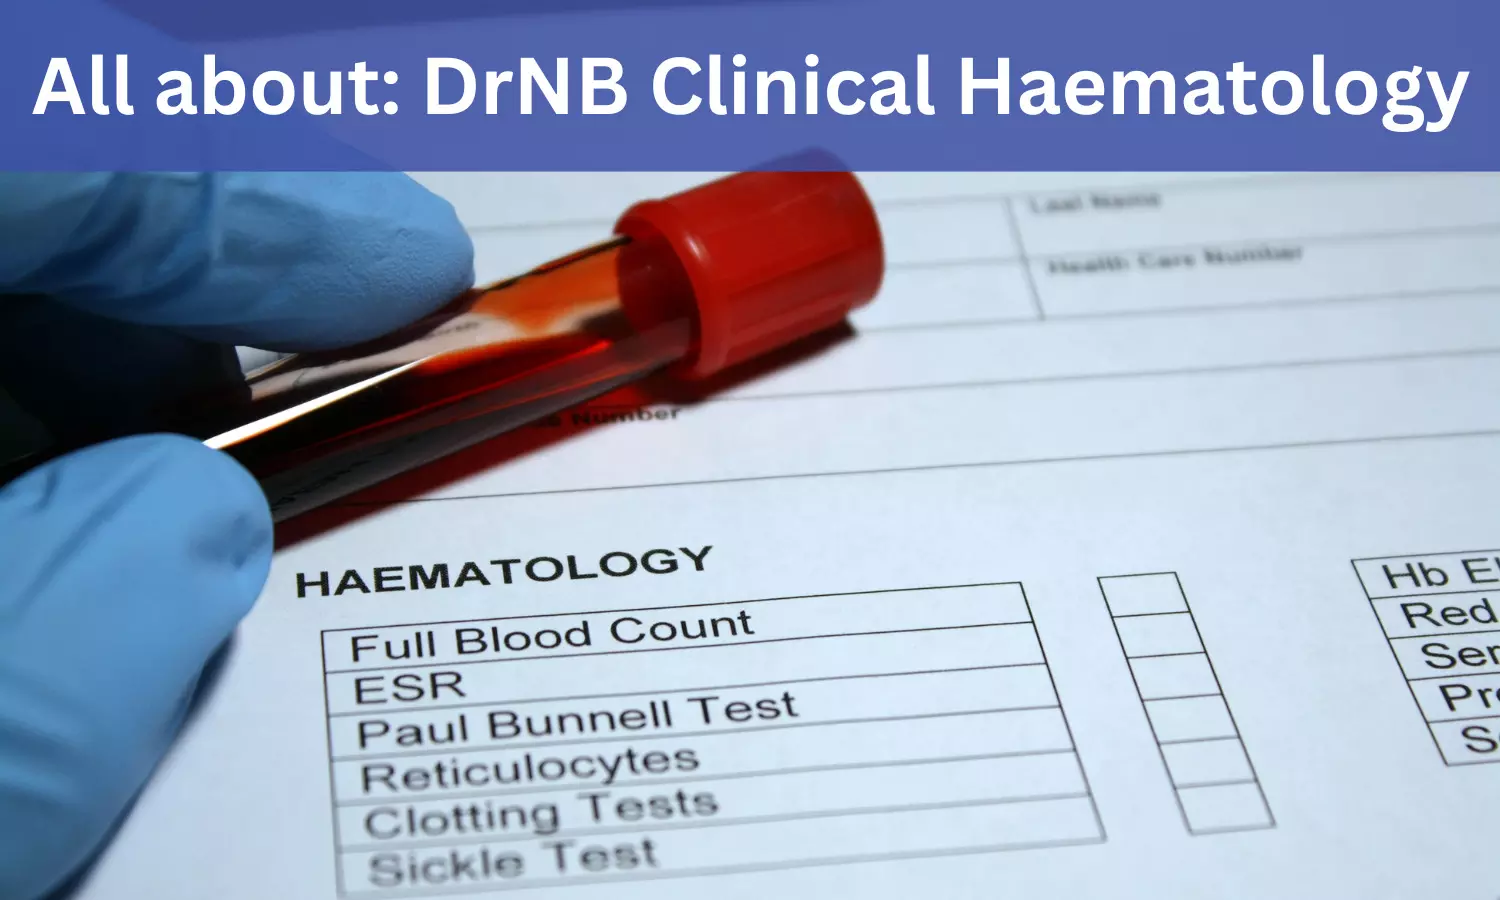 DrNB Clinical Haematology: Admissions, Medical Colleges, Fees, Eligibility Criteria details